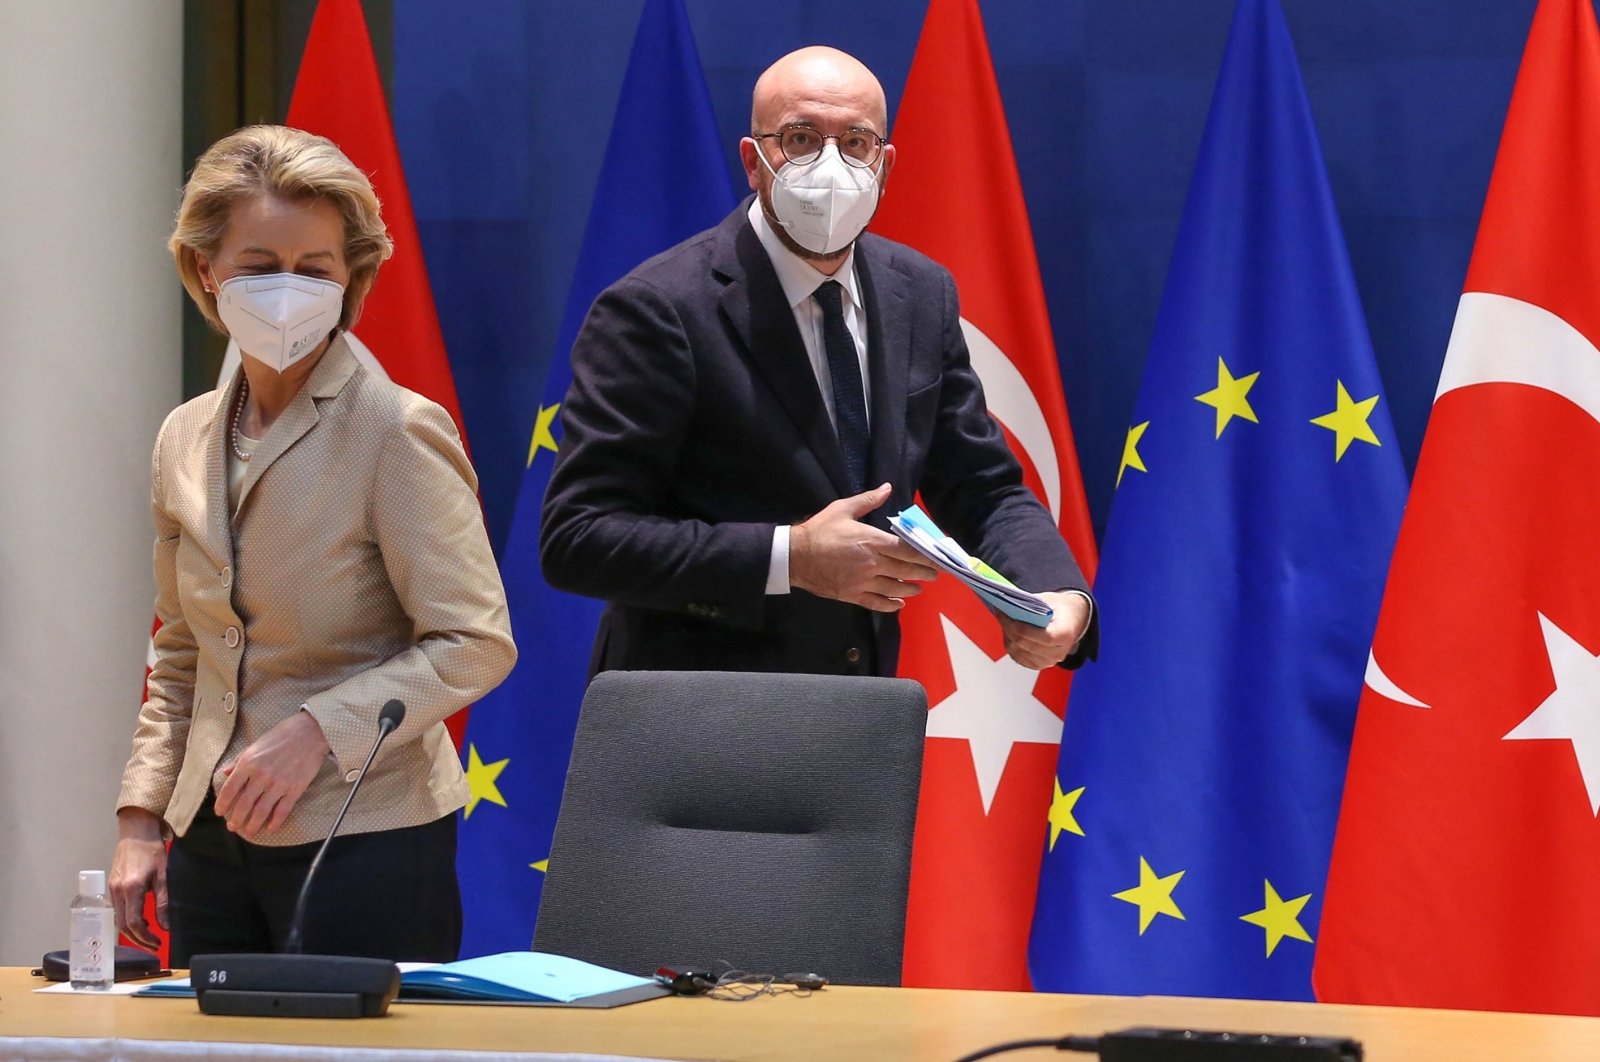 European Commission President Ursula von der Leyen (L) and European Council President Charles Michel arrive for a videoconference with President Recep Tayyip Erdoğan, not pictured, at the Europa Building, Brussels, Belgium, March 19, 2021. (Getty Images)